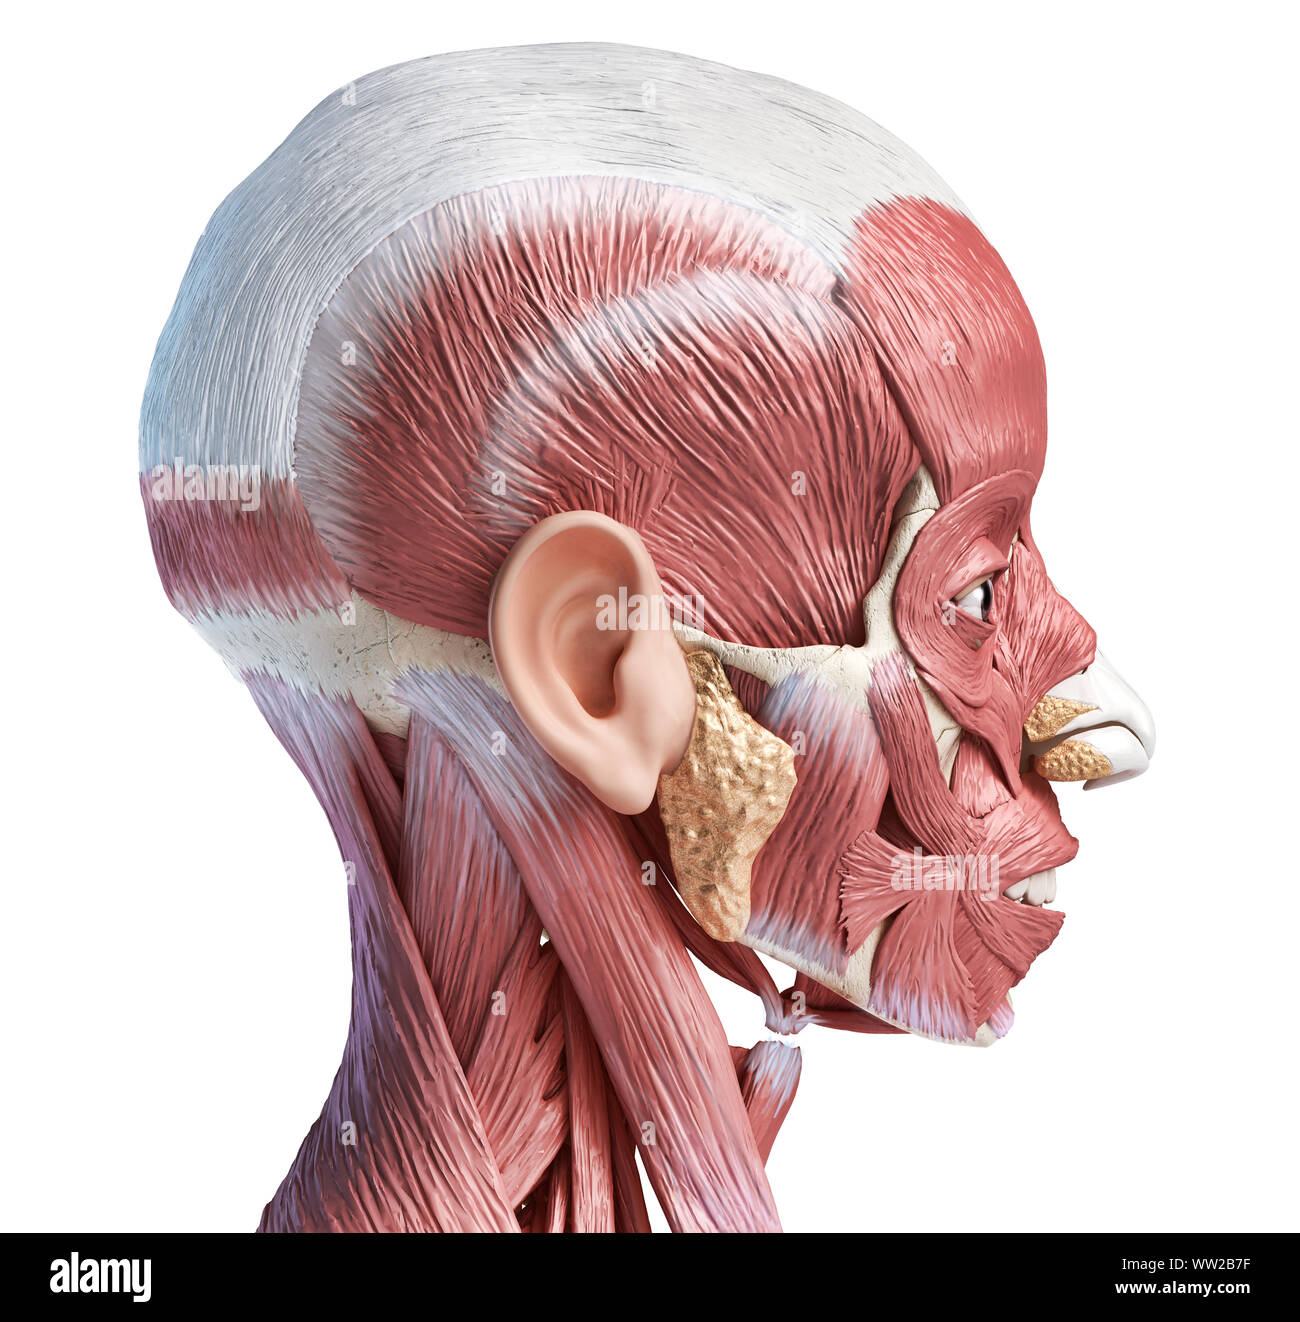 Human head anatomy 3d illustration muscular system, lateral view on white background. Stock Photo